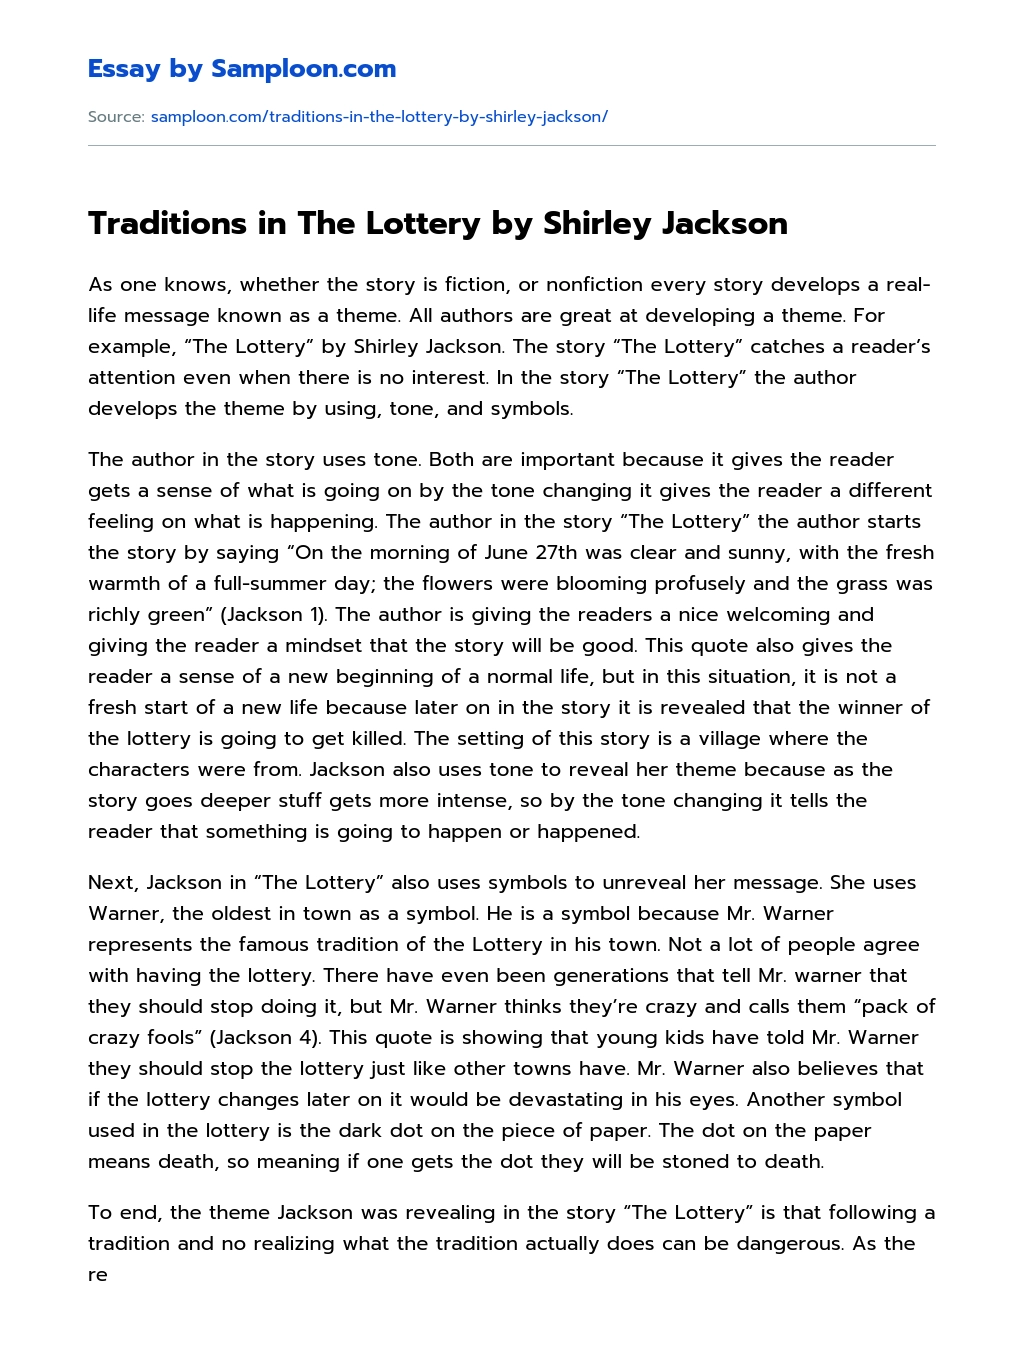 Traditions in The Lottery by Shirley Jackson essay